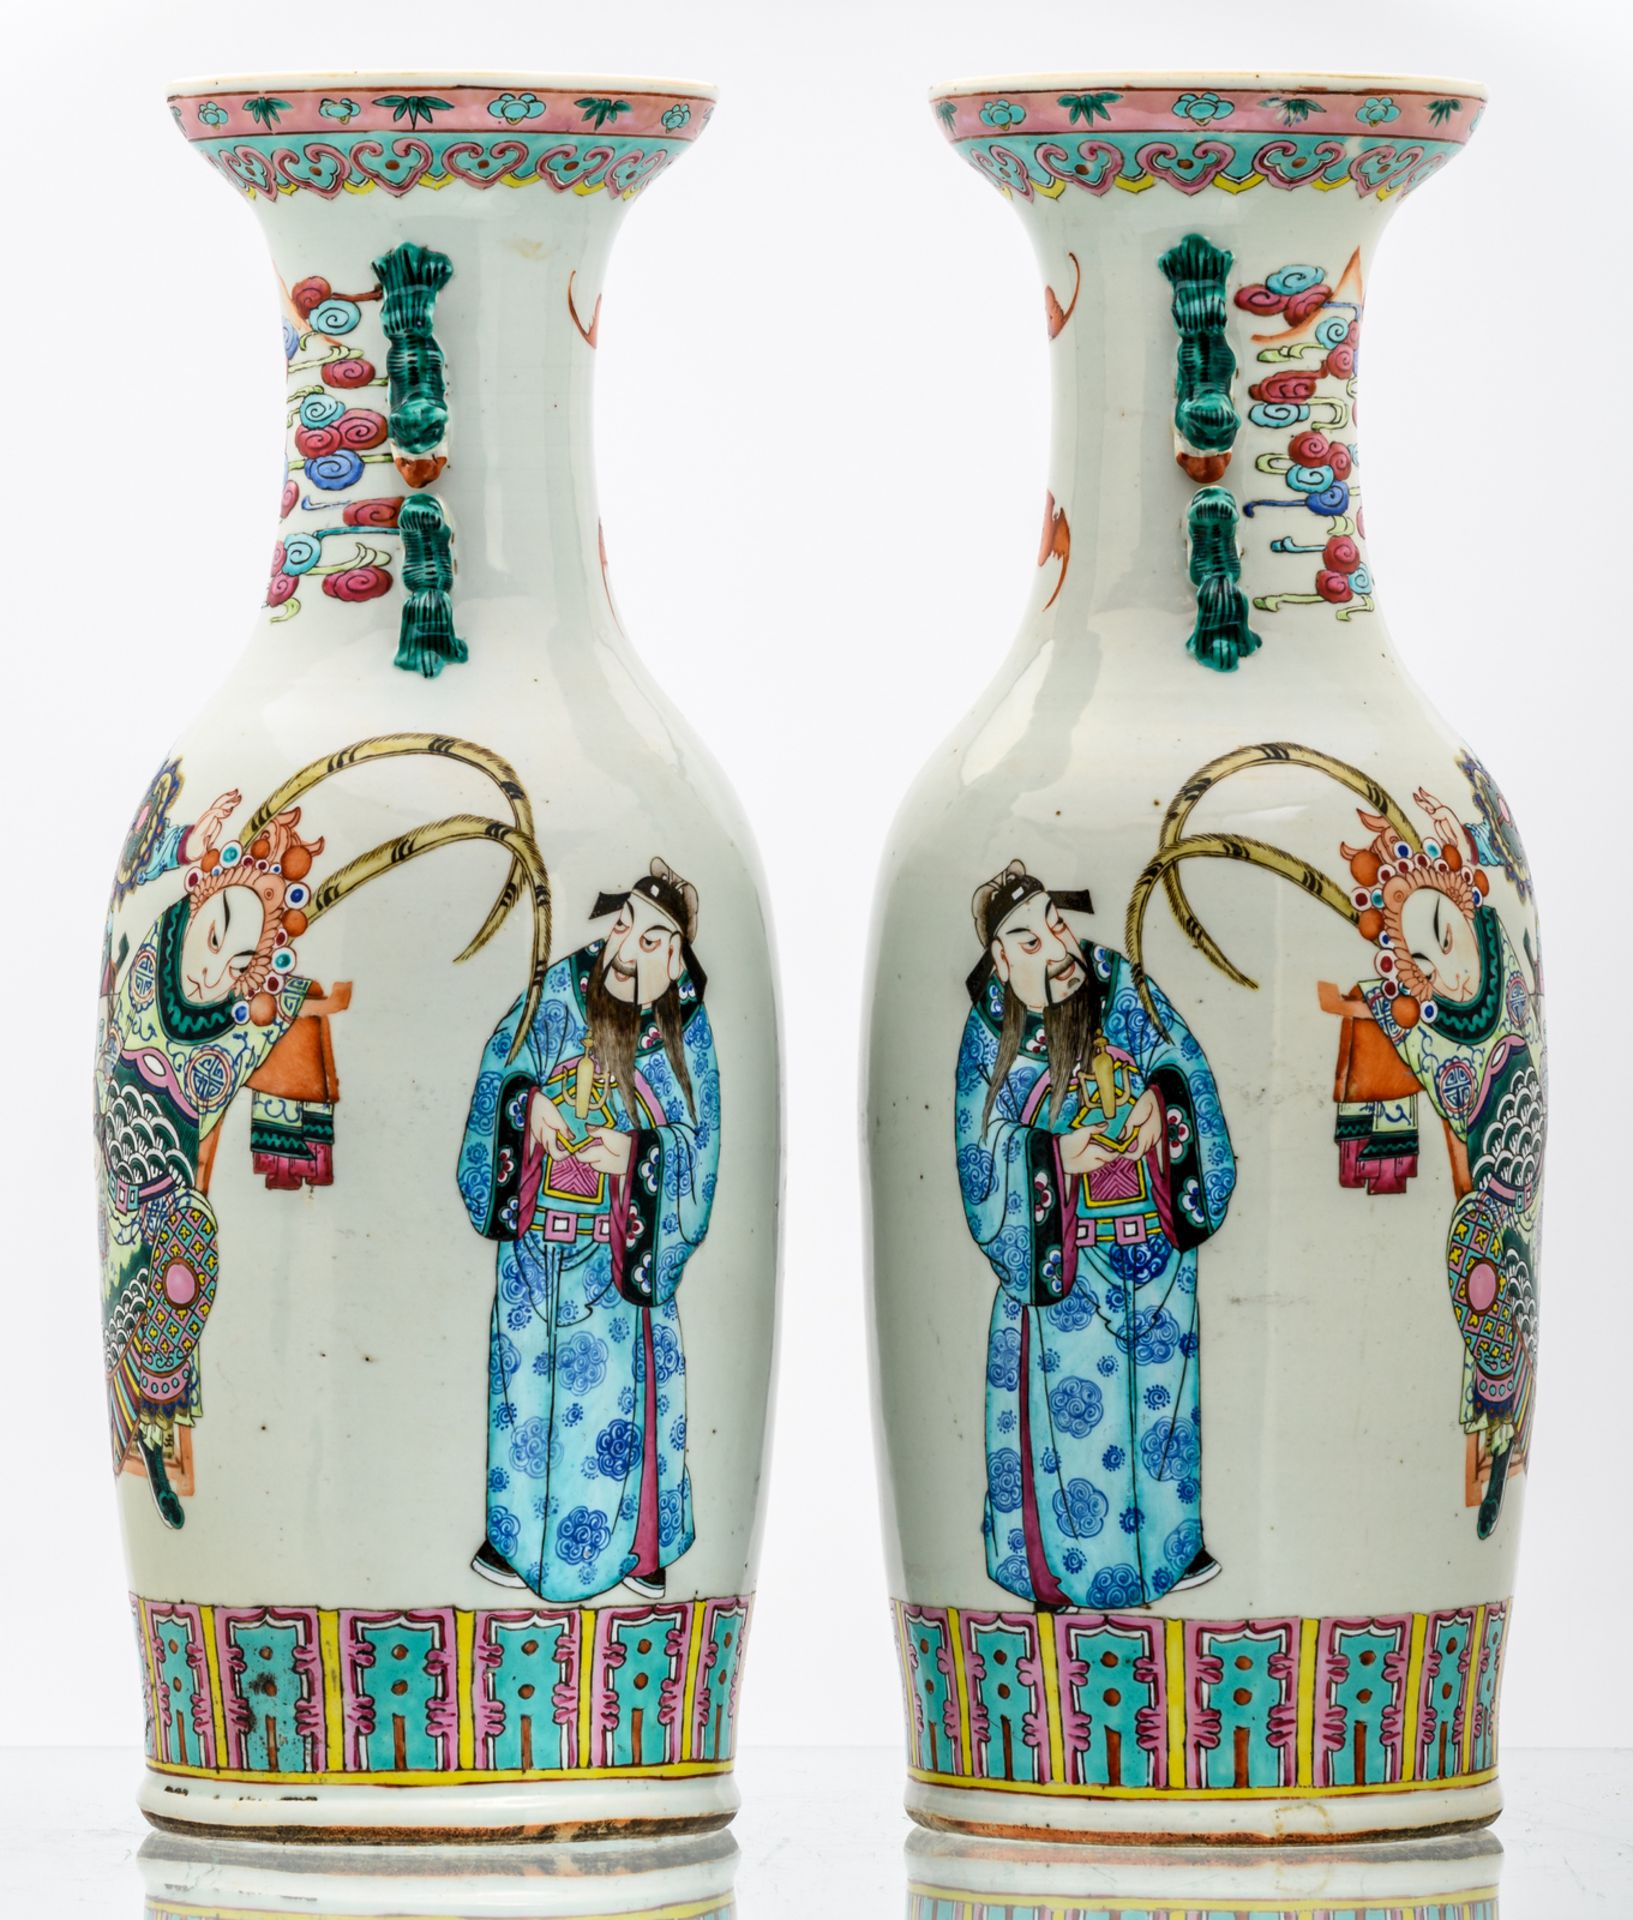 A pair of Chinese famille rose and polychrome decorated vases with figures and bats, 19thC, H 59,5 - Image 4 of 6